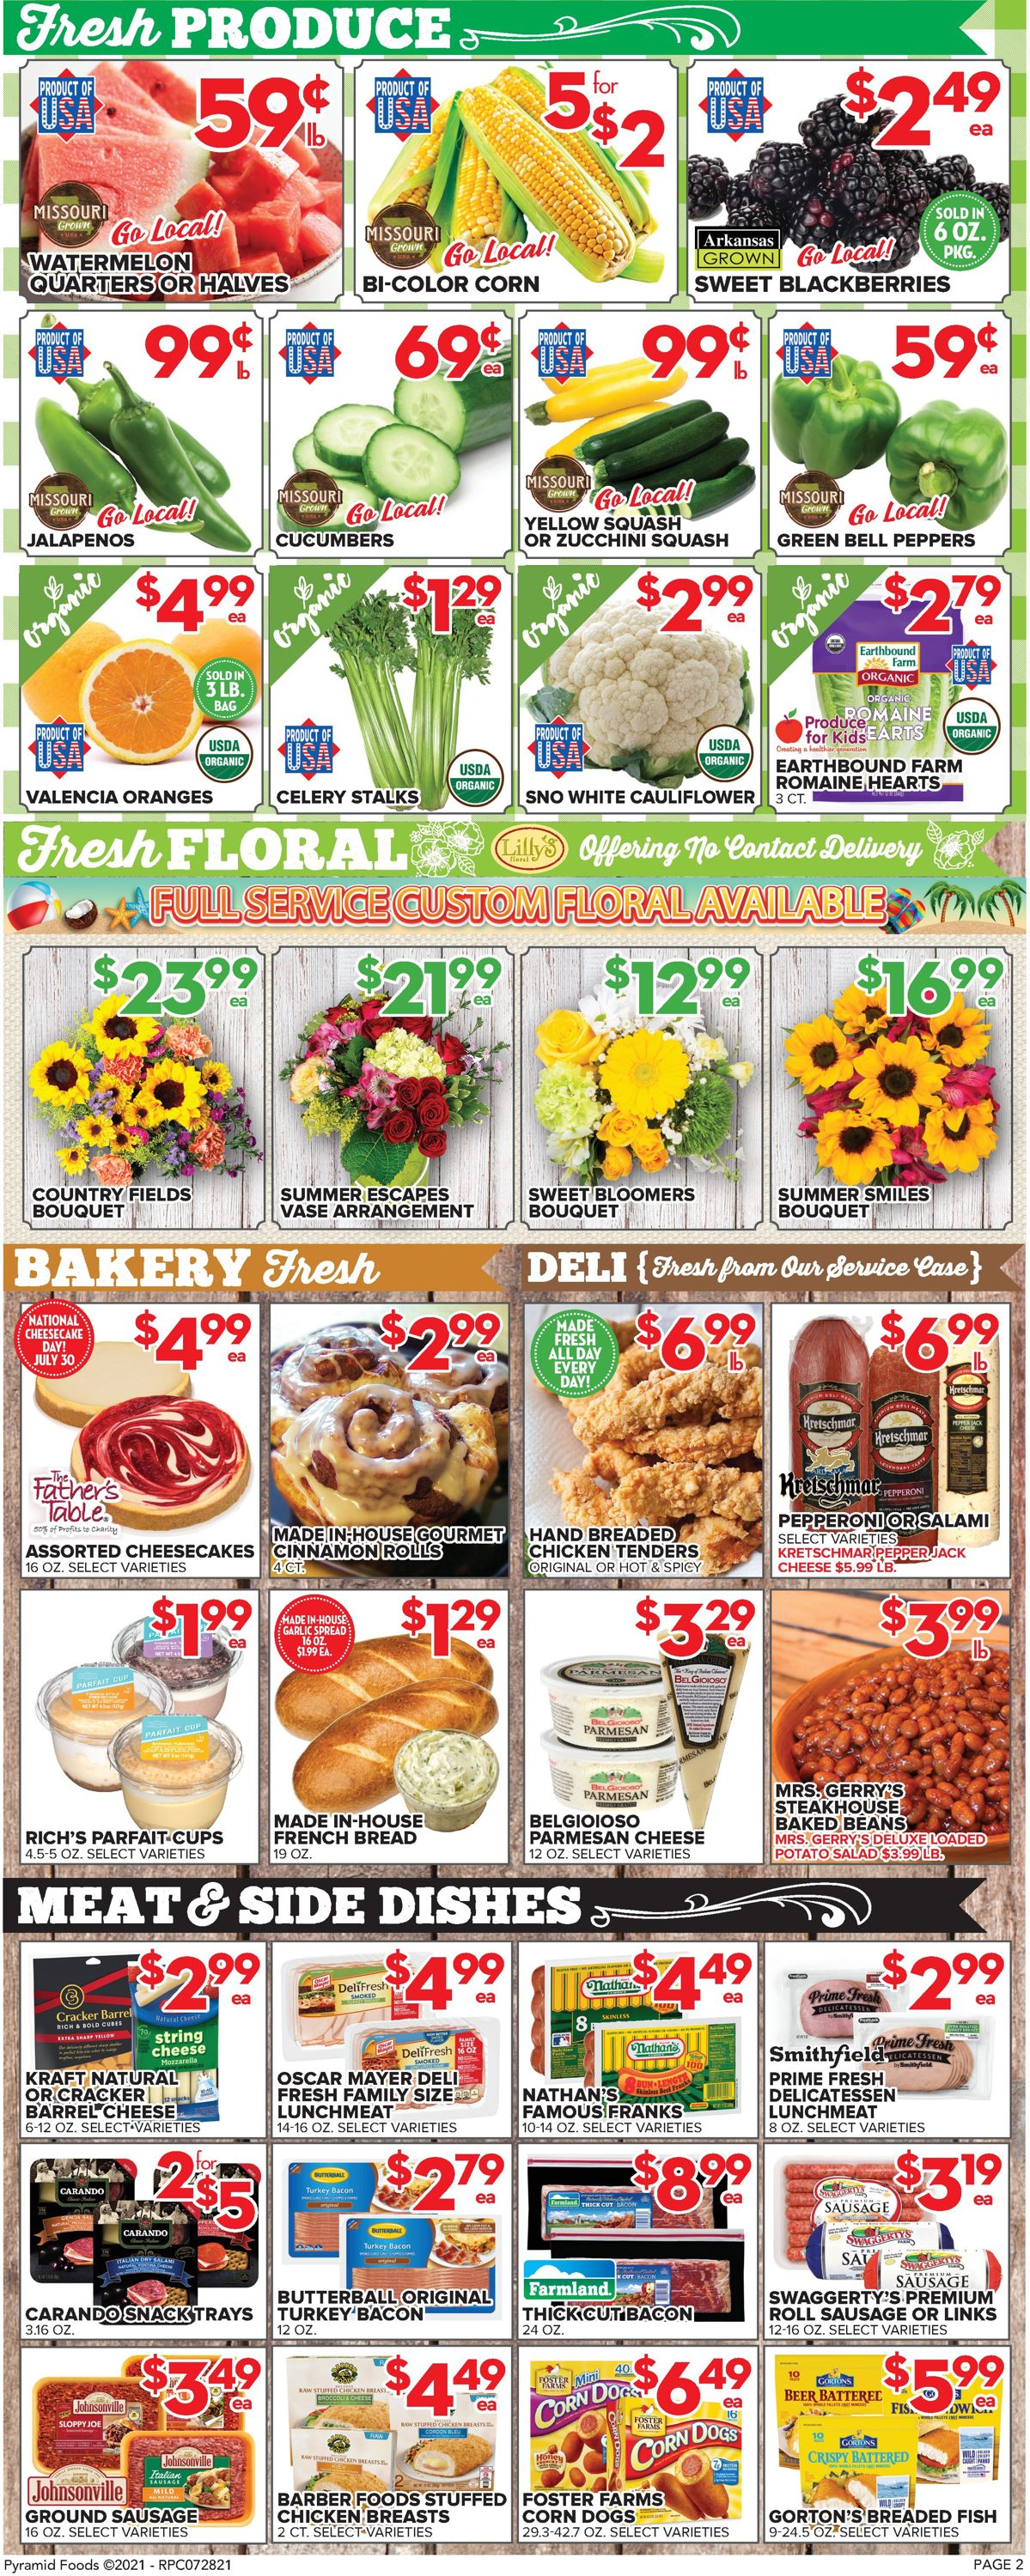 Price Cutter Ad from 07/28/2021